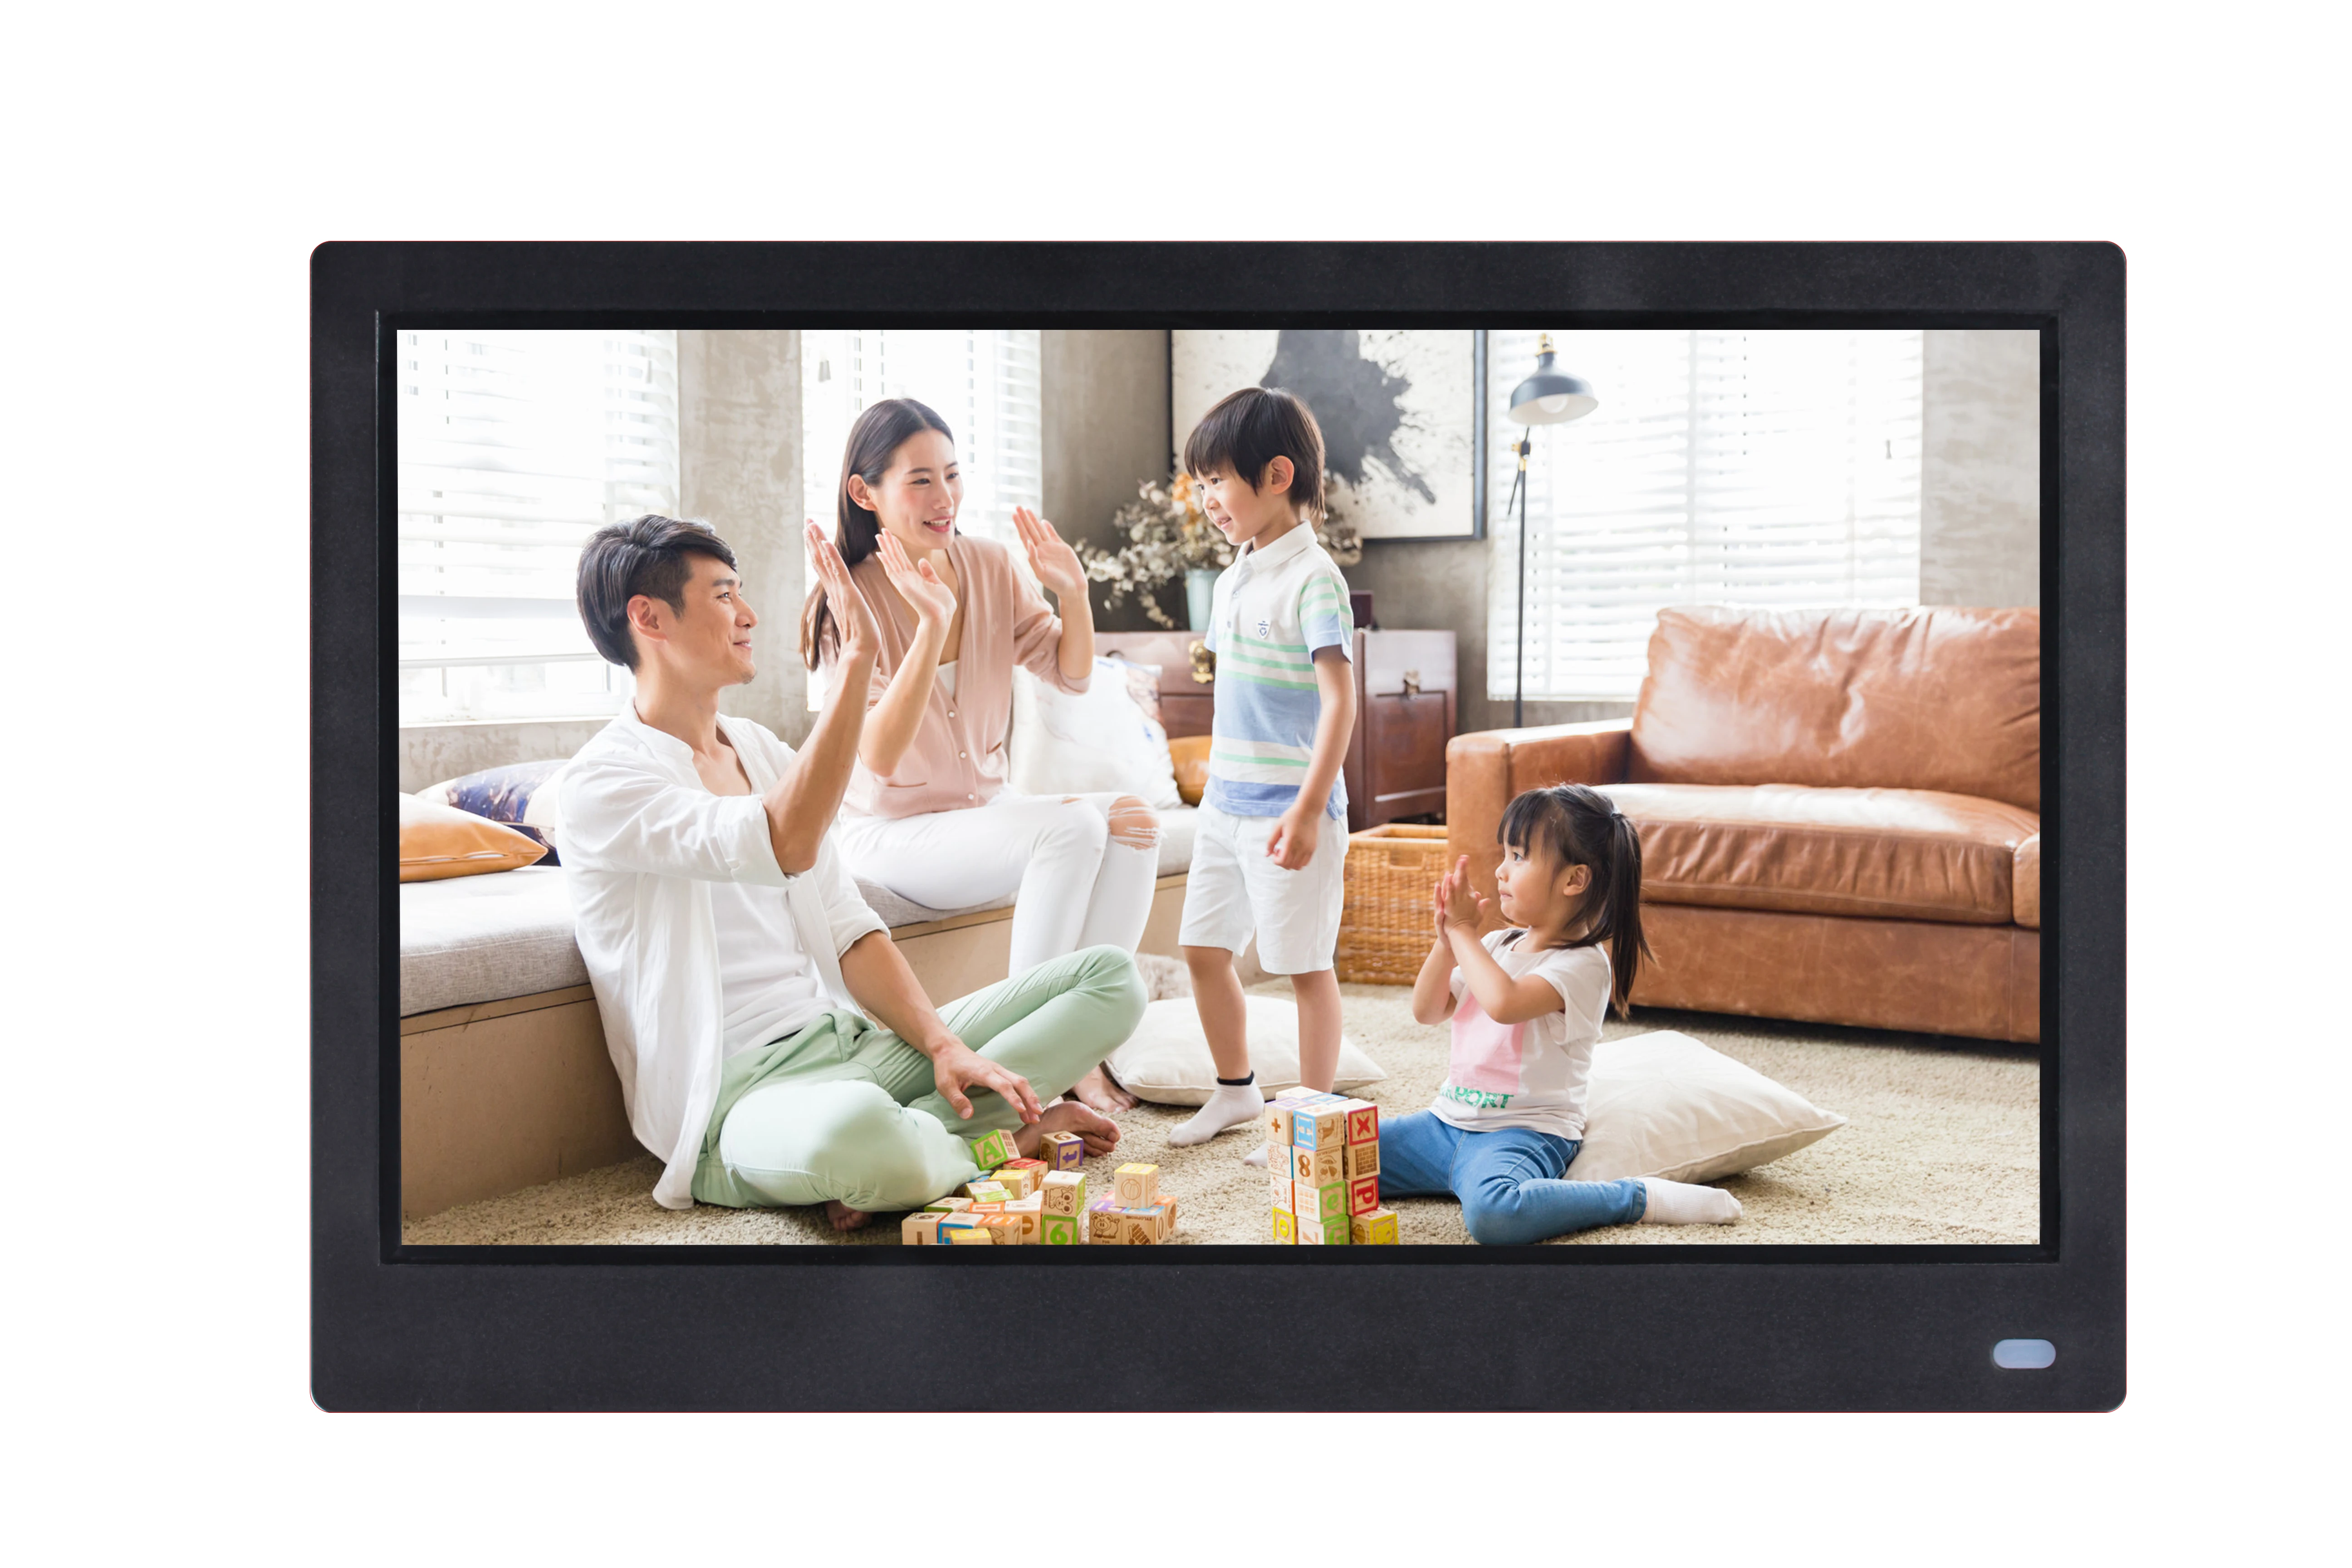 Buy 12 Inch IPS Backlight HDMI 1920*1080 Full Function Digital Photo Frame Electronic Album digitale Picture Music Video on